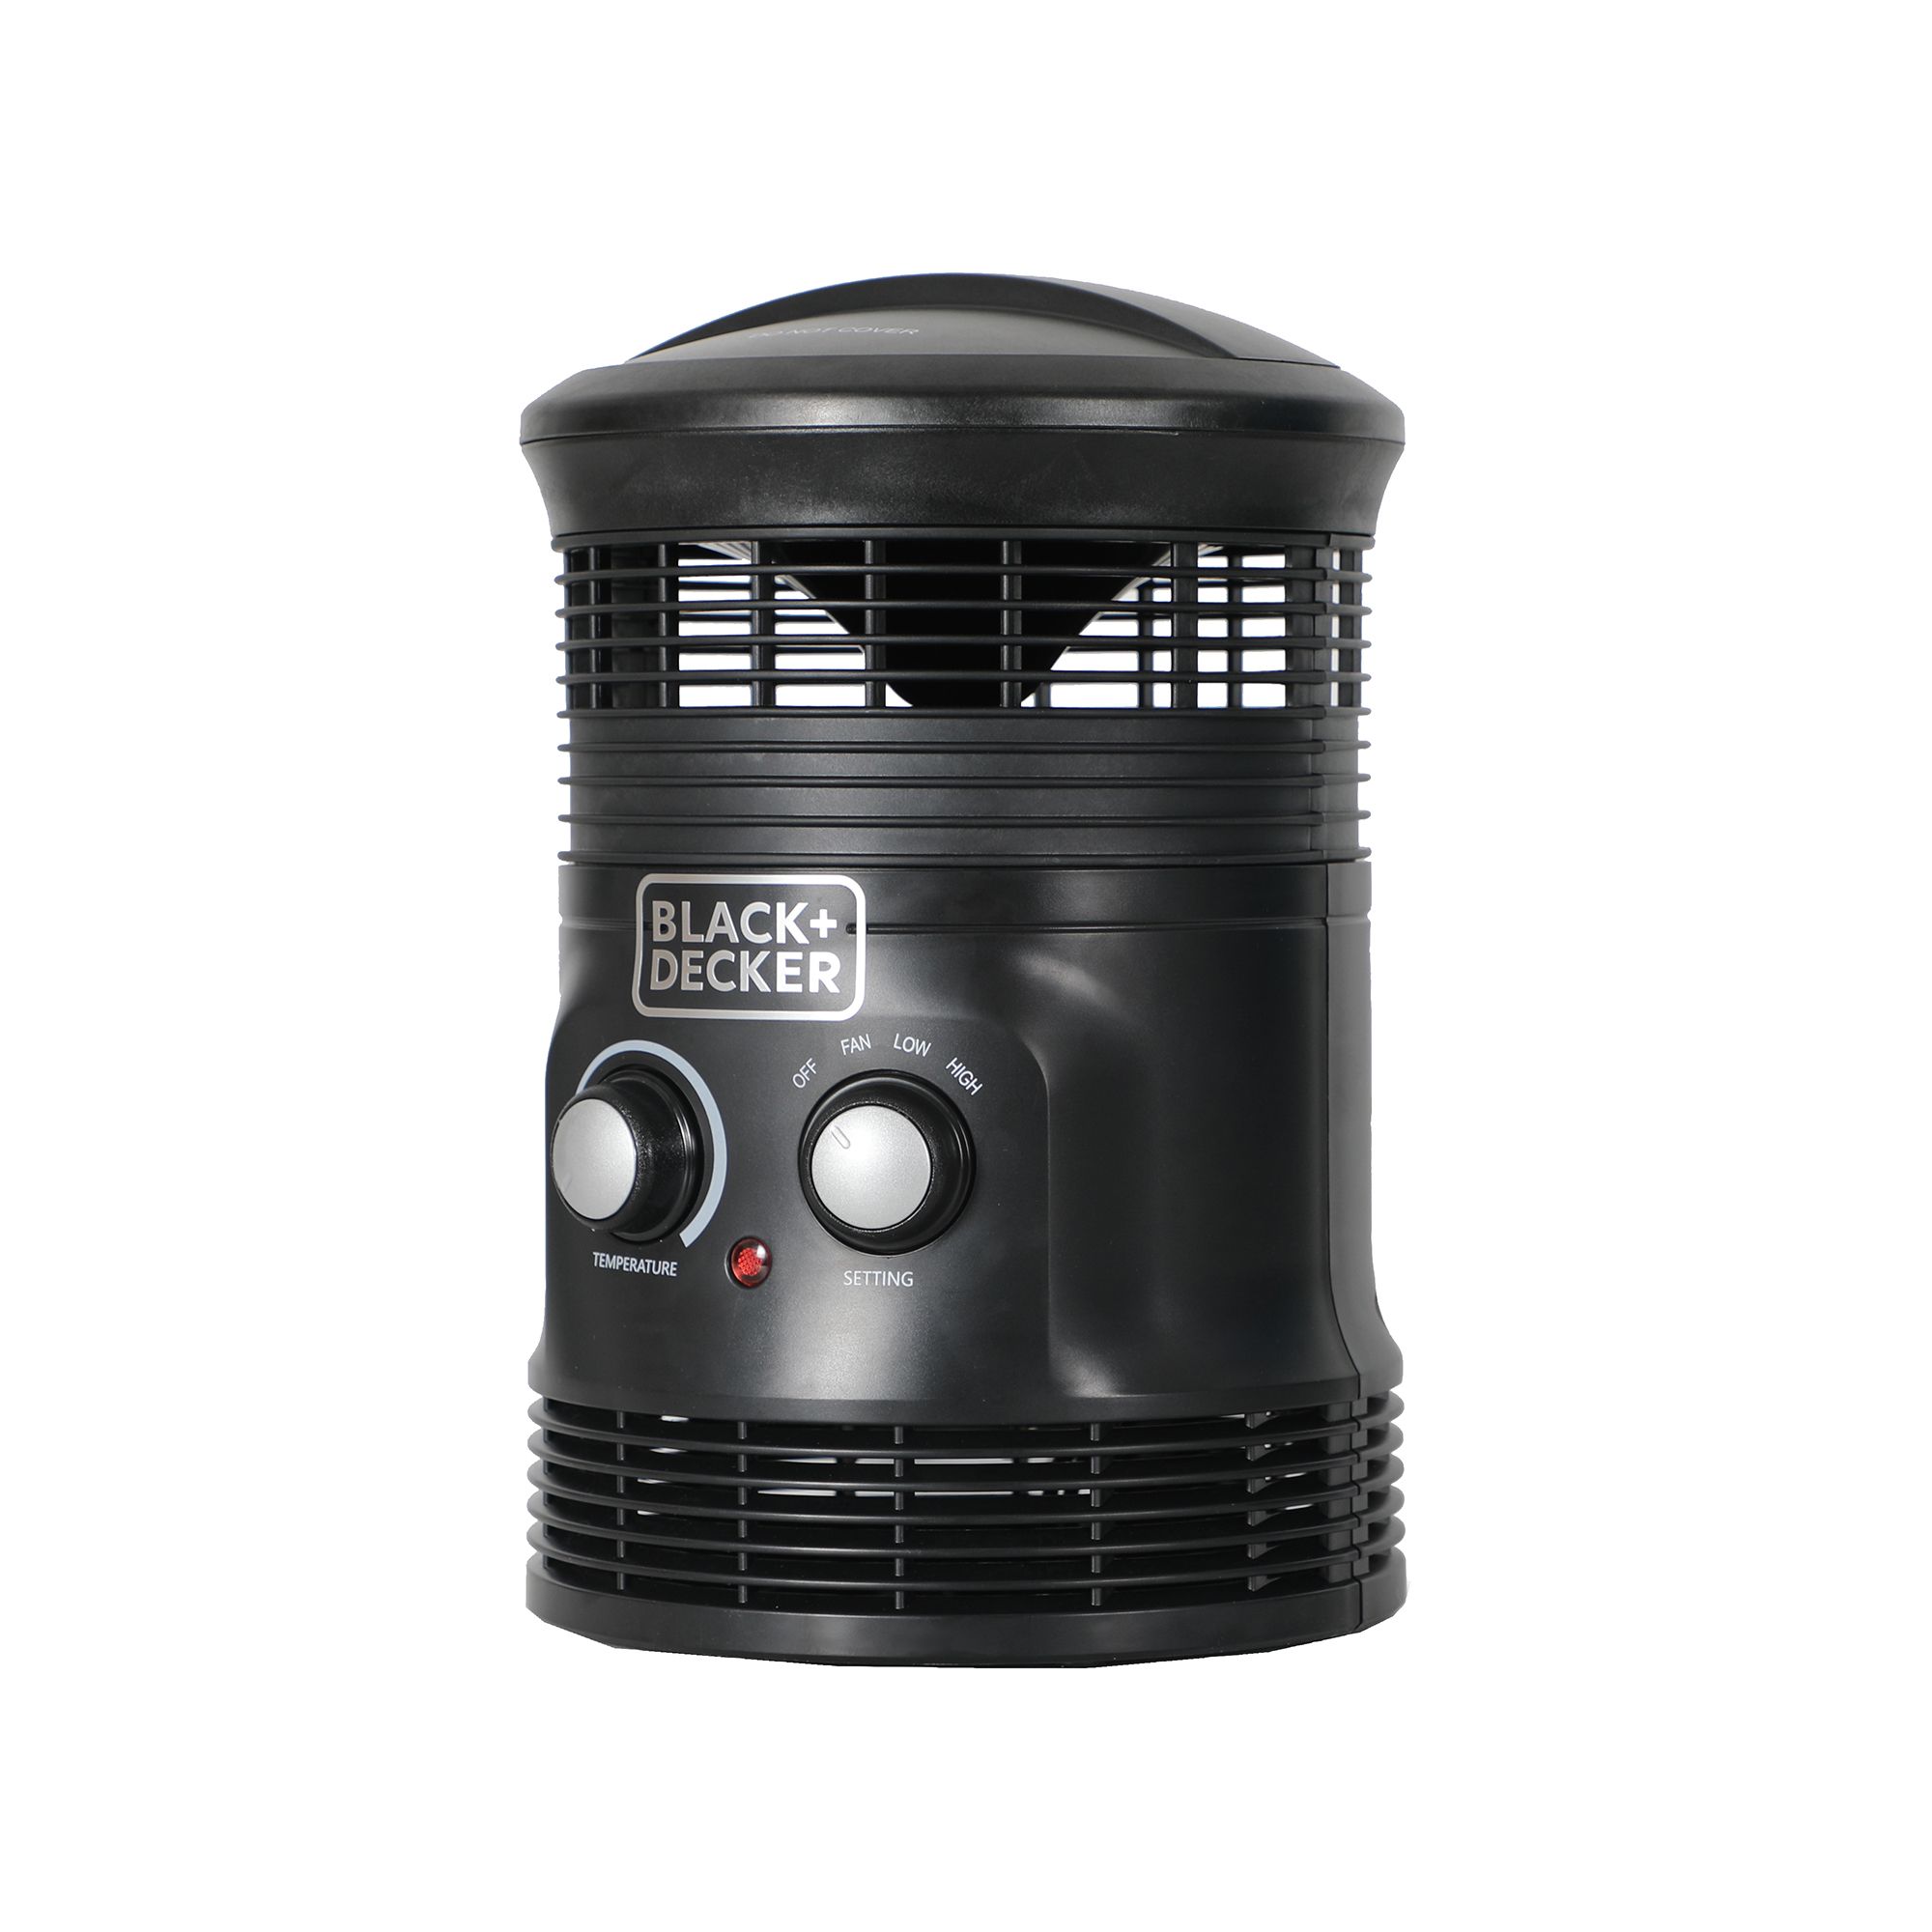 BLACK+DECKER Electric Heater, 360° Surround Portable Heater, Mini Heater  with Fan & Adjustable Thermostat, Space Heater with 3 Settings & Manual